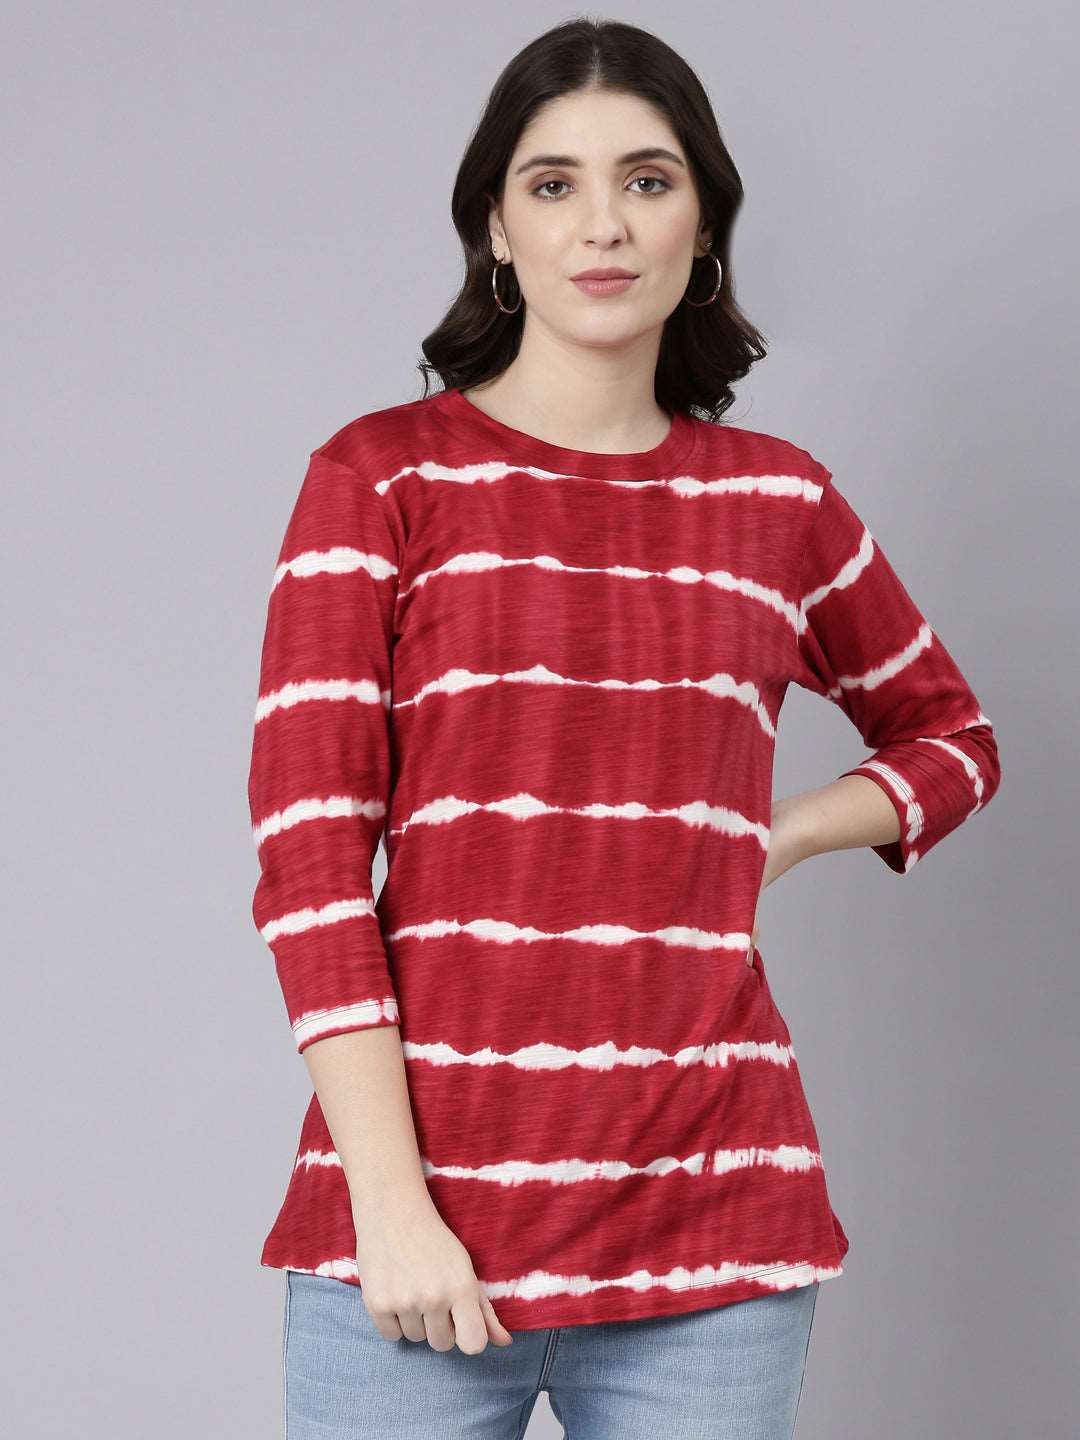 Buy TheShaili Casual Round Neck Top for Women's /girls on online in India